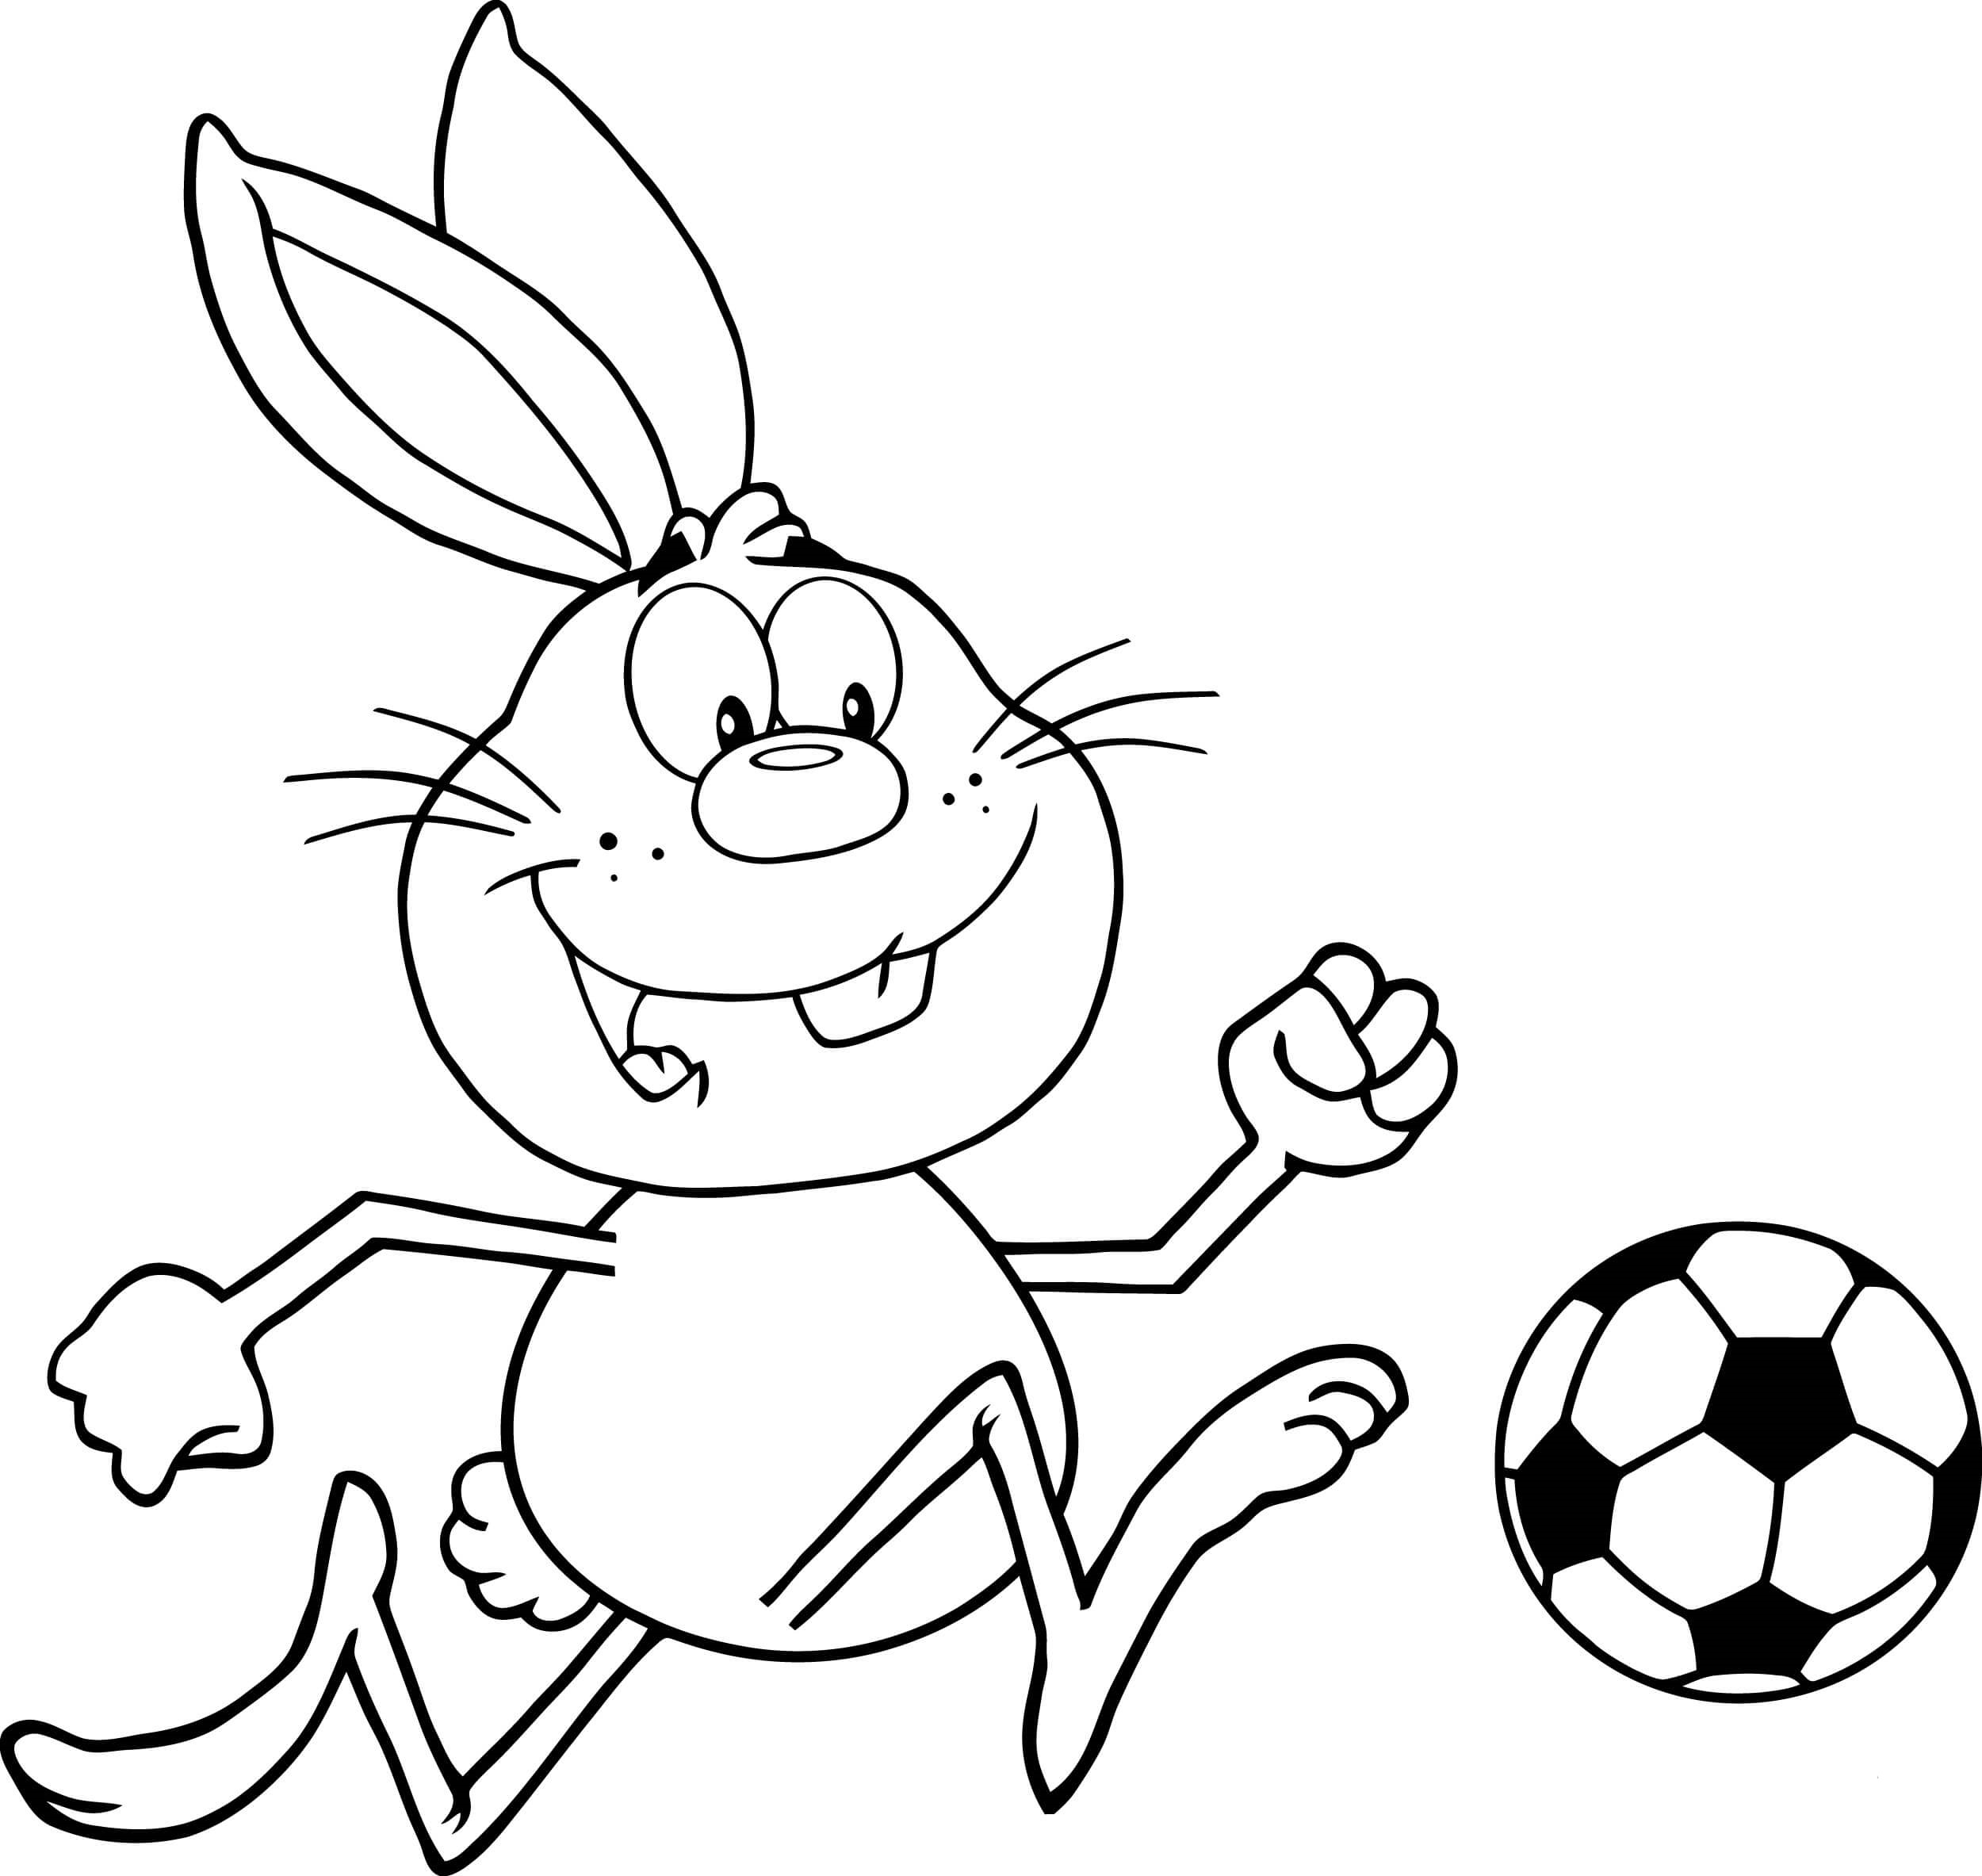 Rabbit Playing Soccer Coloring Page